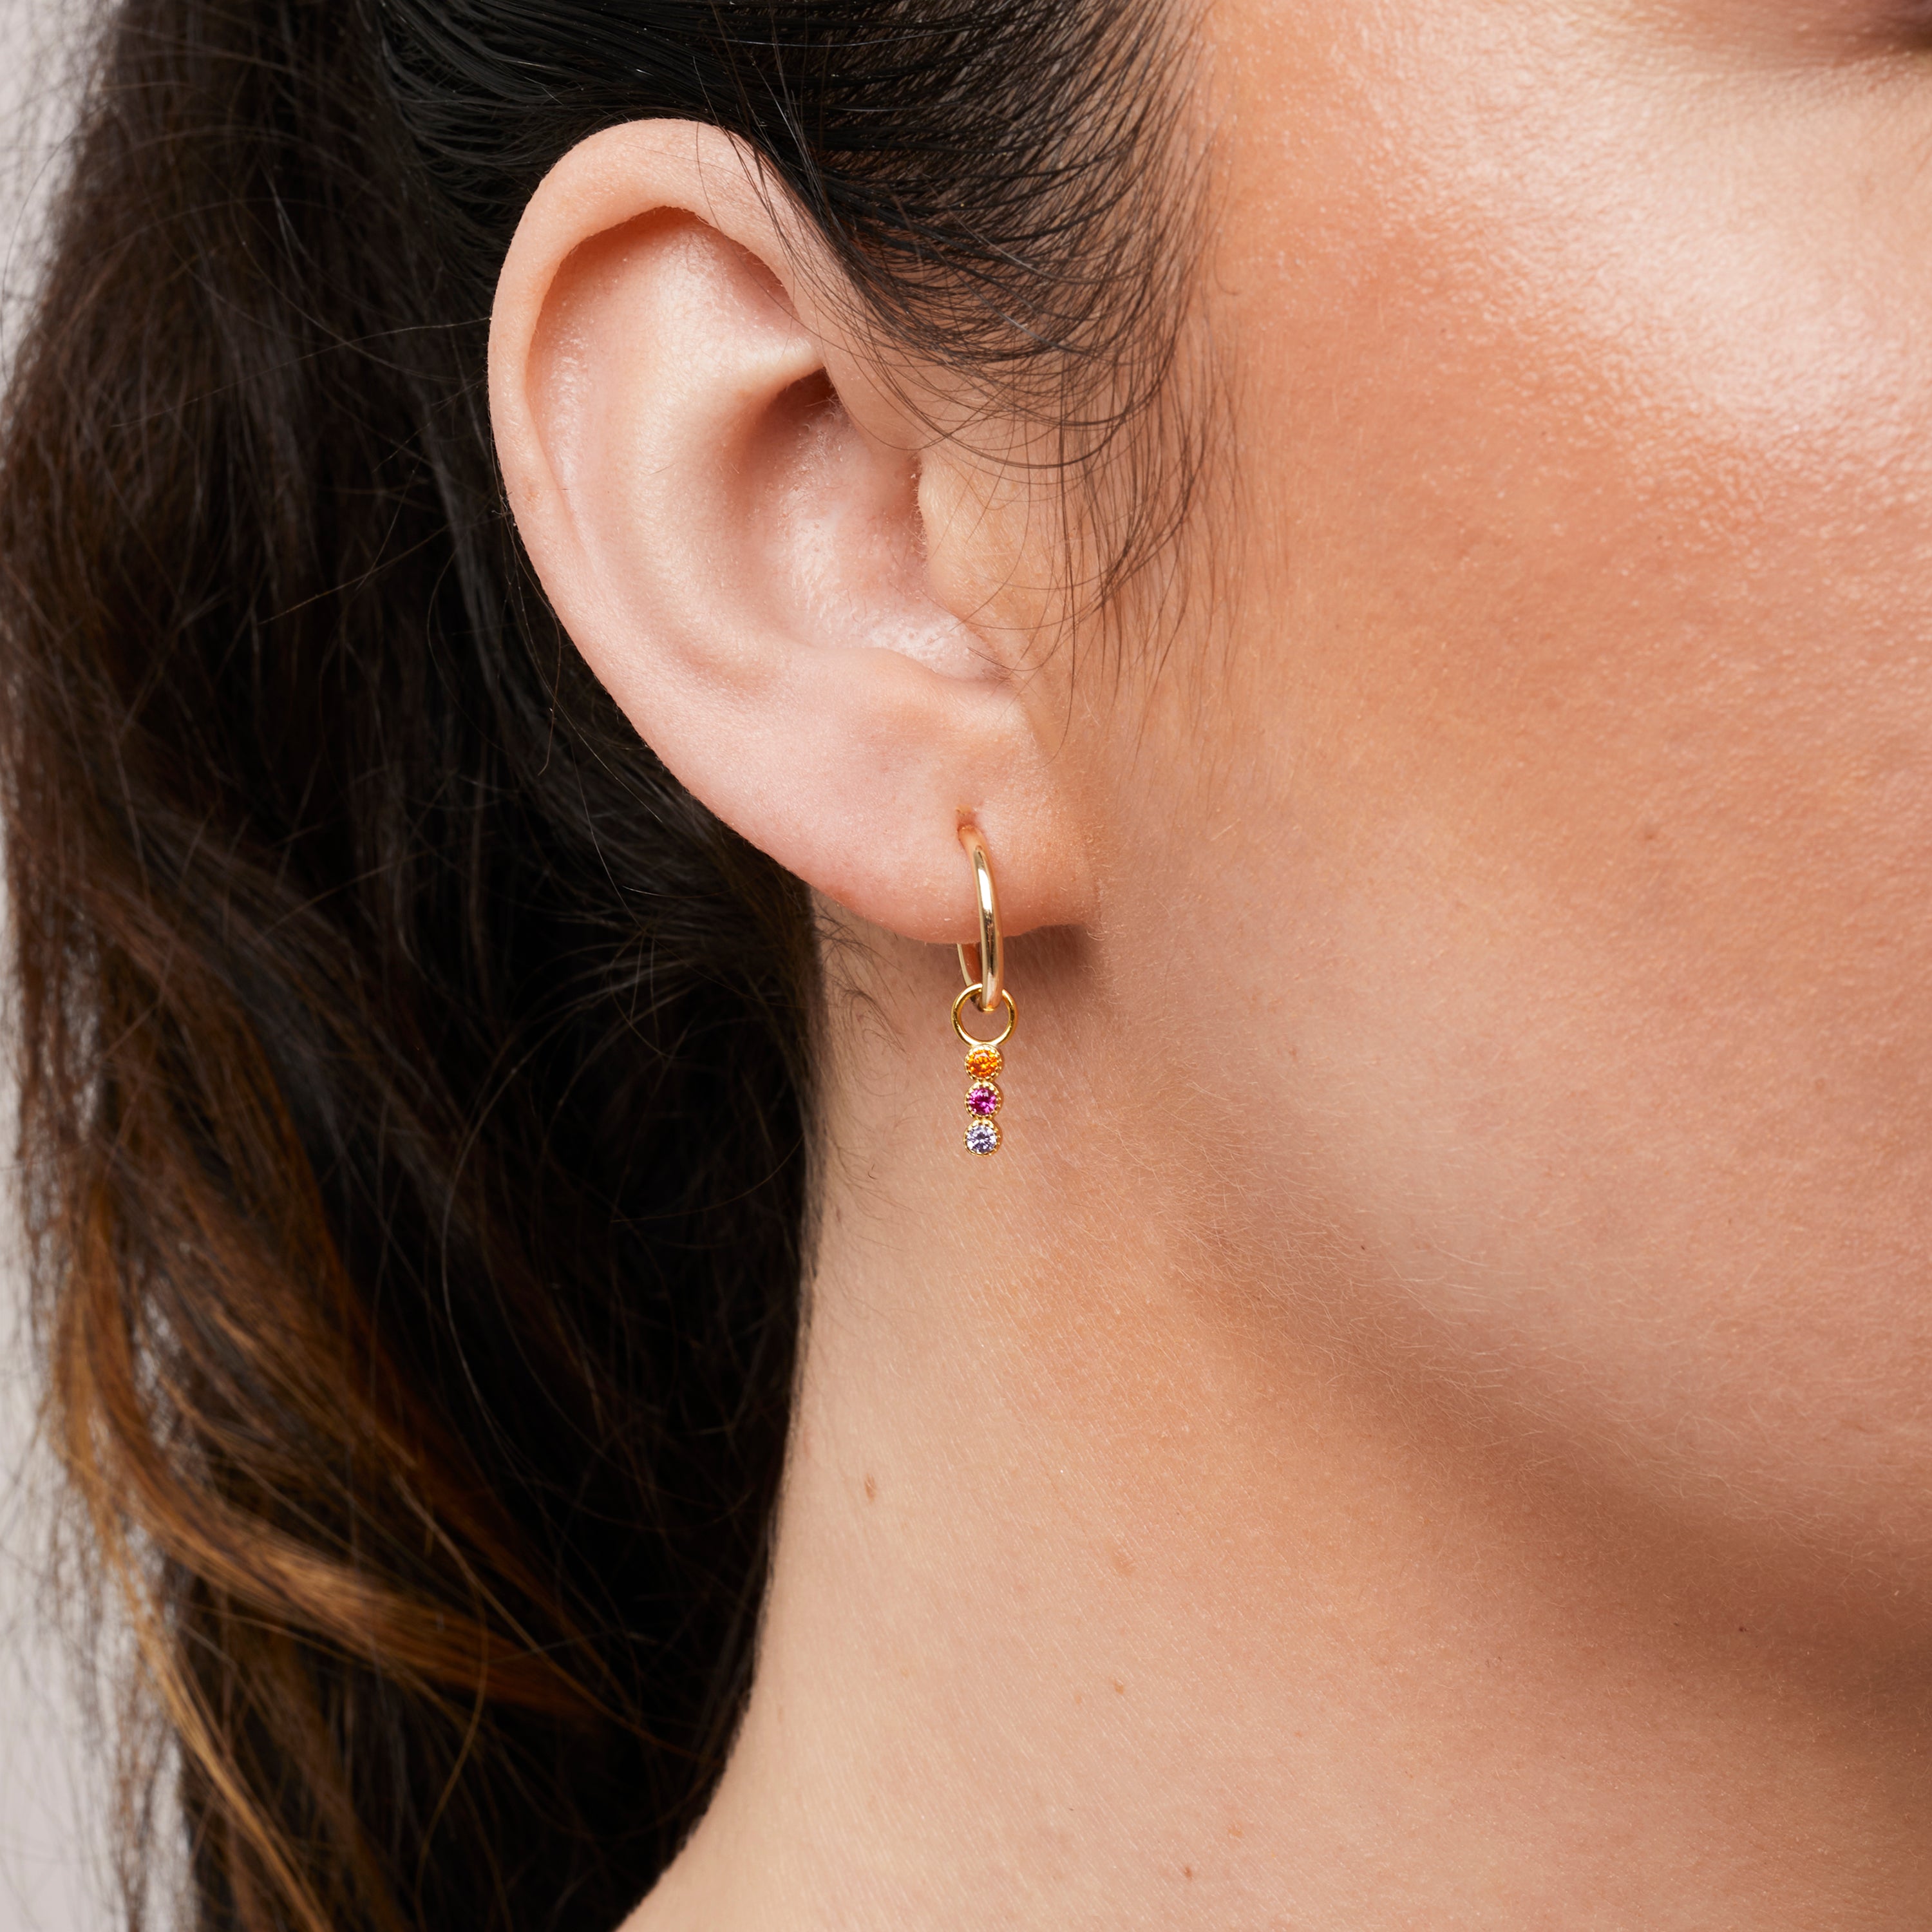 A model wearing the Sunset Hoop Charms are made with high-quality materials, including 18K gold plating over 925 Sterling Silver. These charms are both non-tarnish and water resistant. The perfect combination of style and durability.